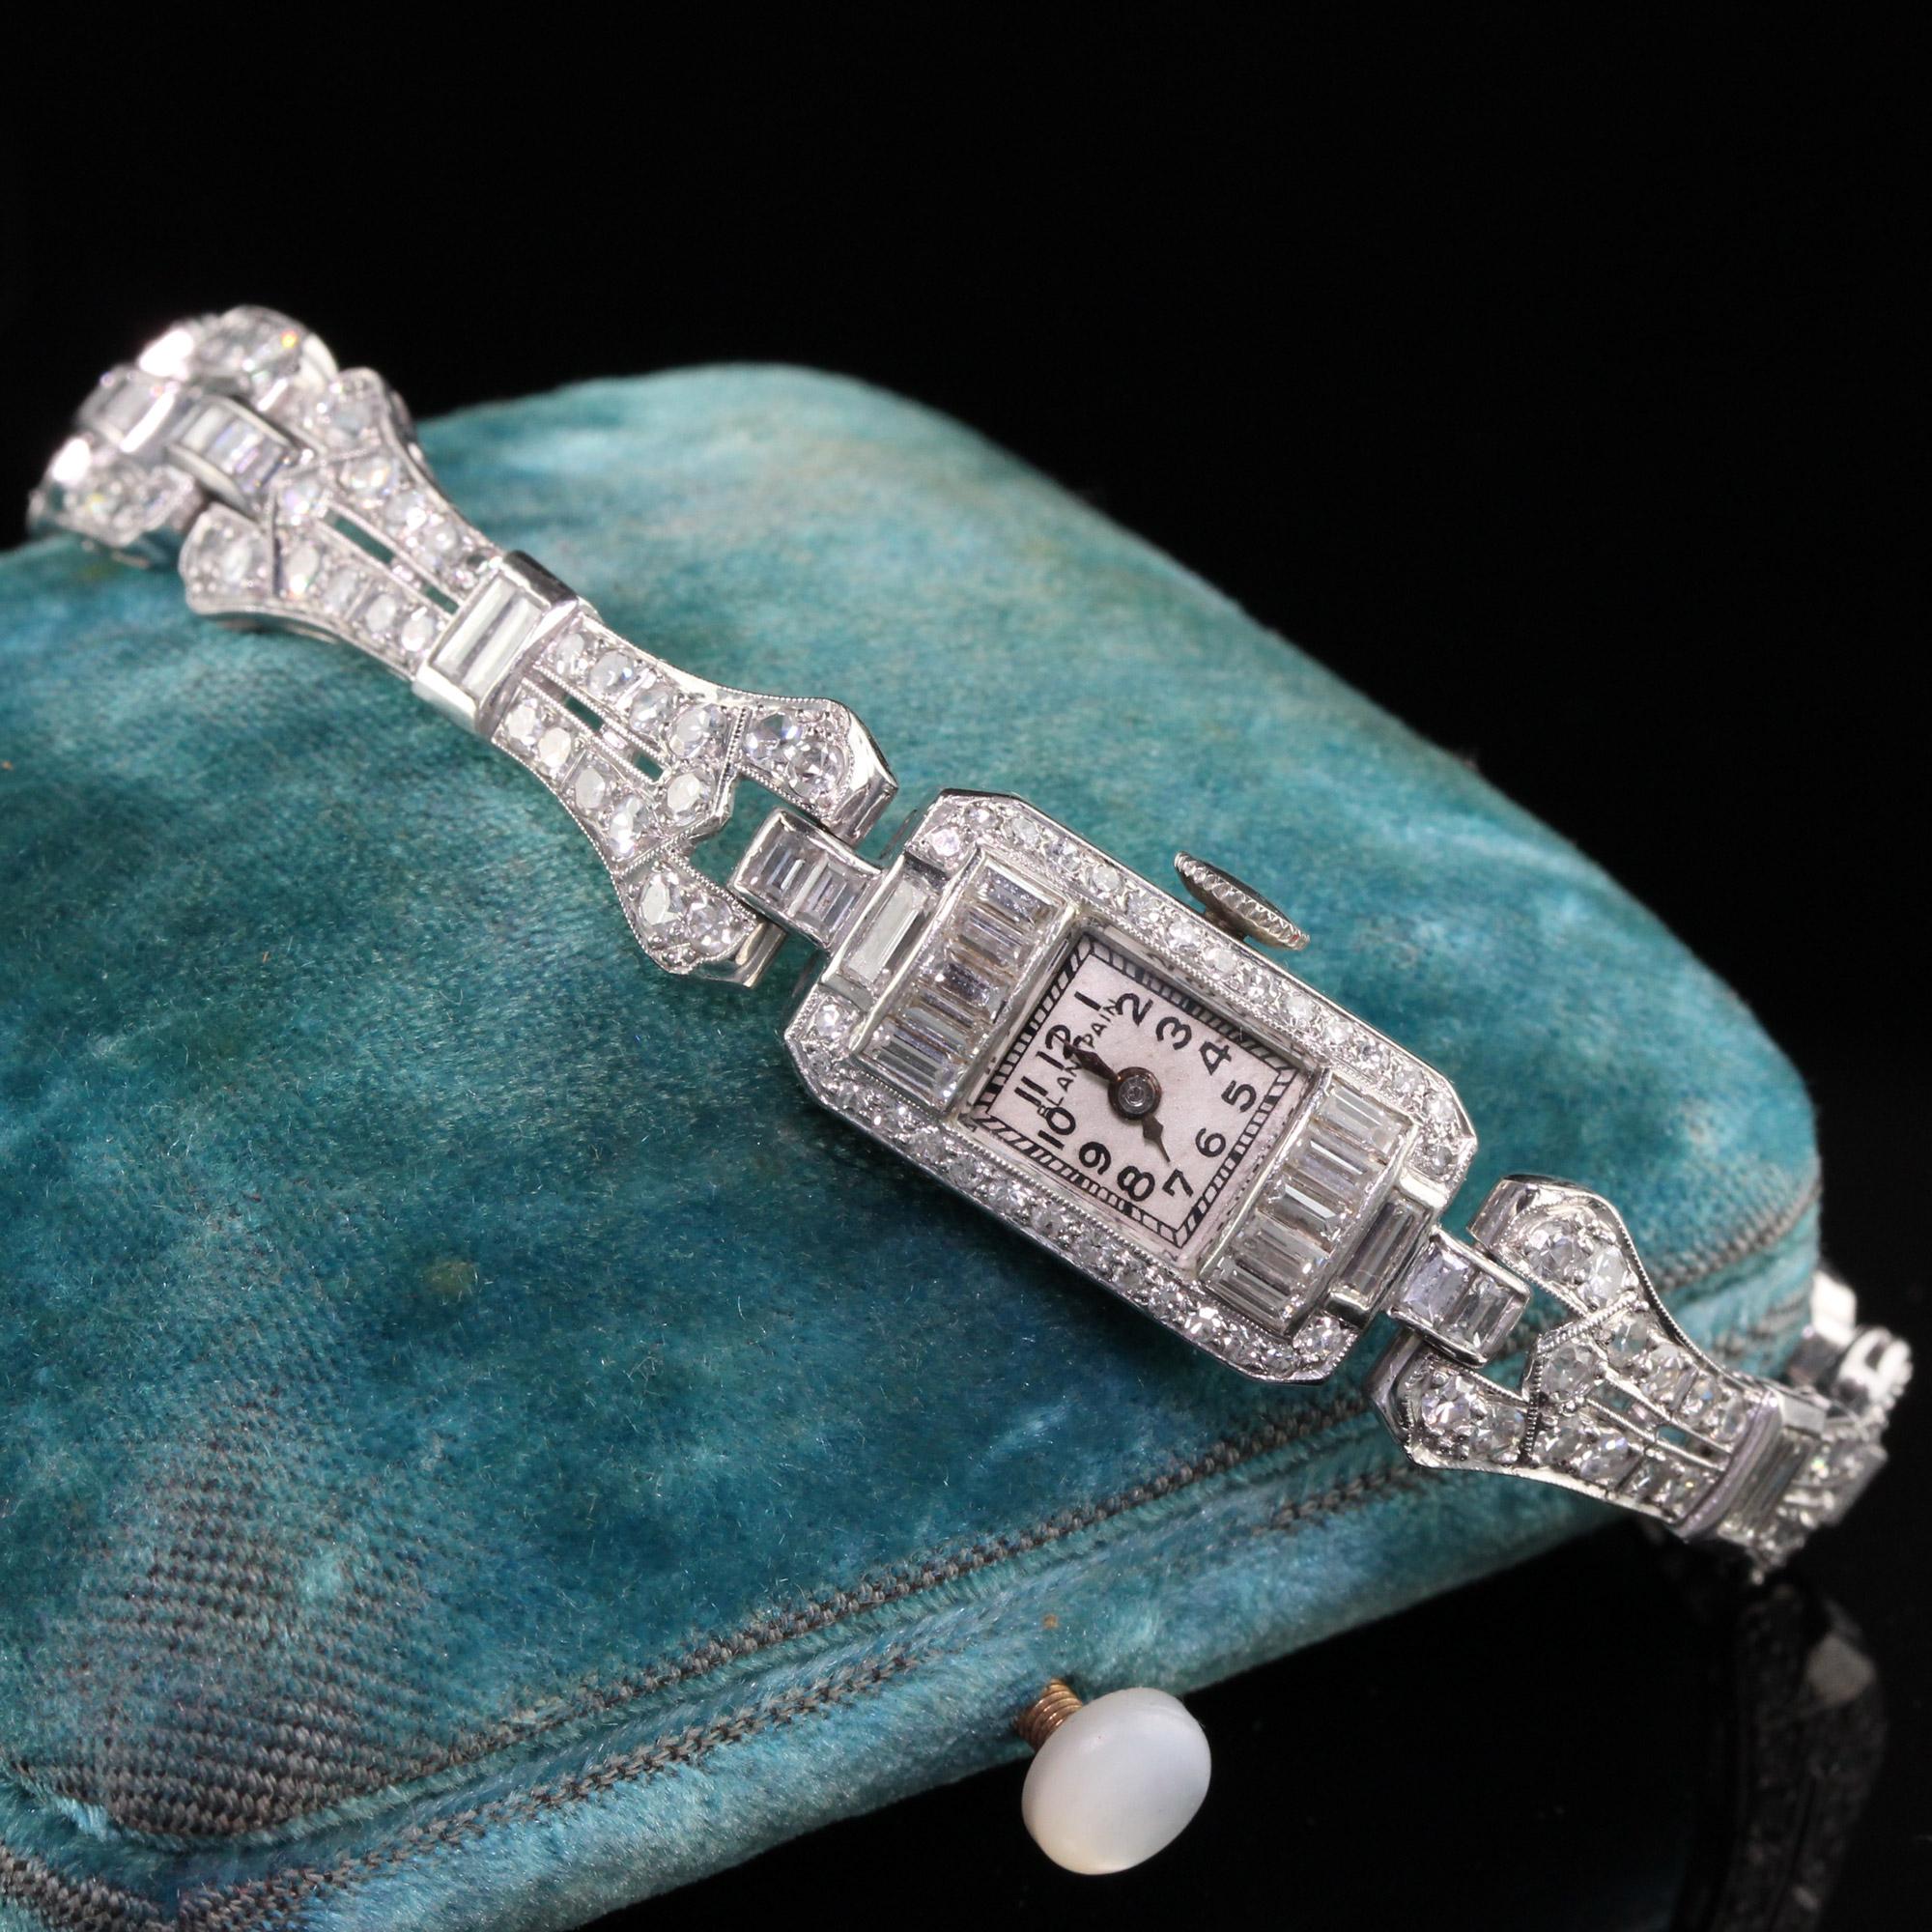 Beautiful Antique Art Deco Blancpain Old Cut Diamond Baguette Ladies Dress Watch. This incredible art deco Blancpain watch is all original and in great condition. It has recently been serviced and works well. The entire watch and bracelet has